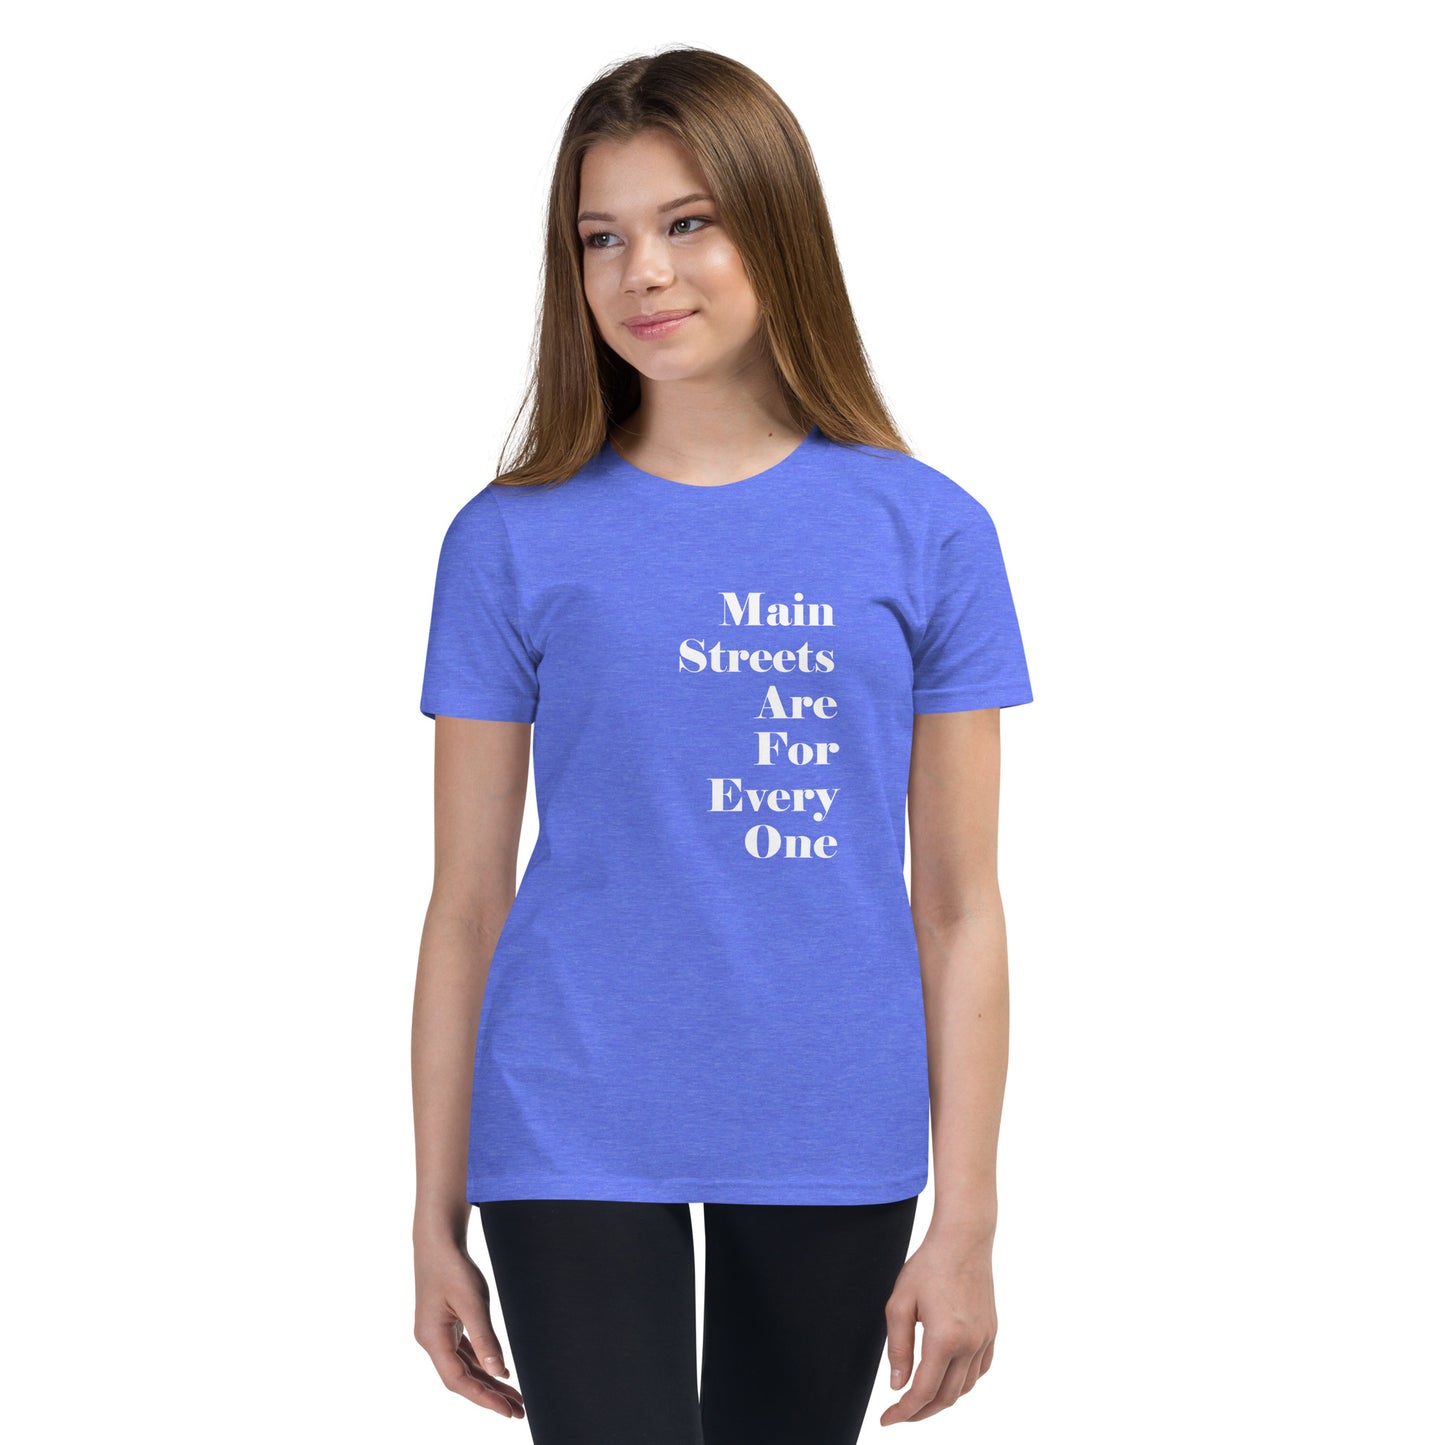 Main Streets Are For Everyone Youth Short Sleeve T-Shirt